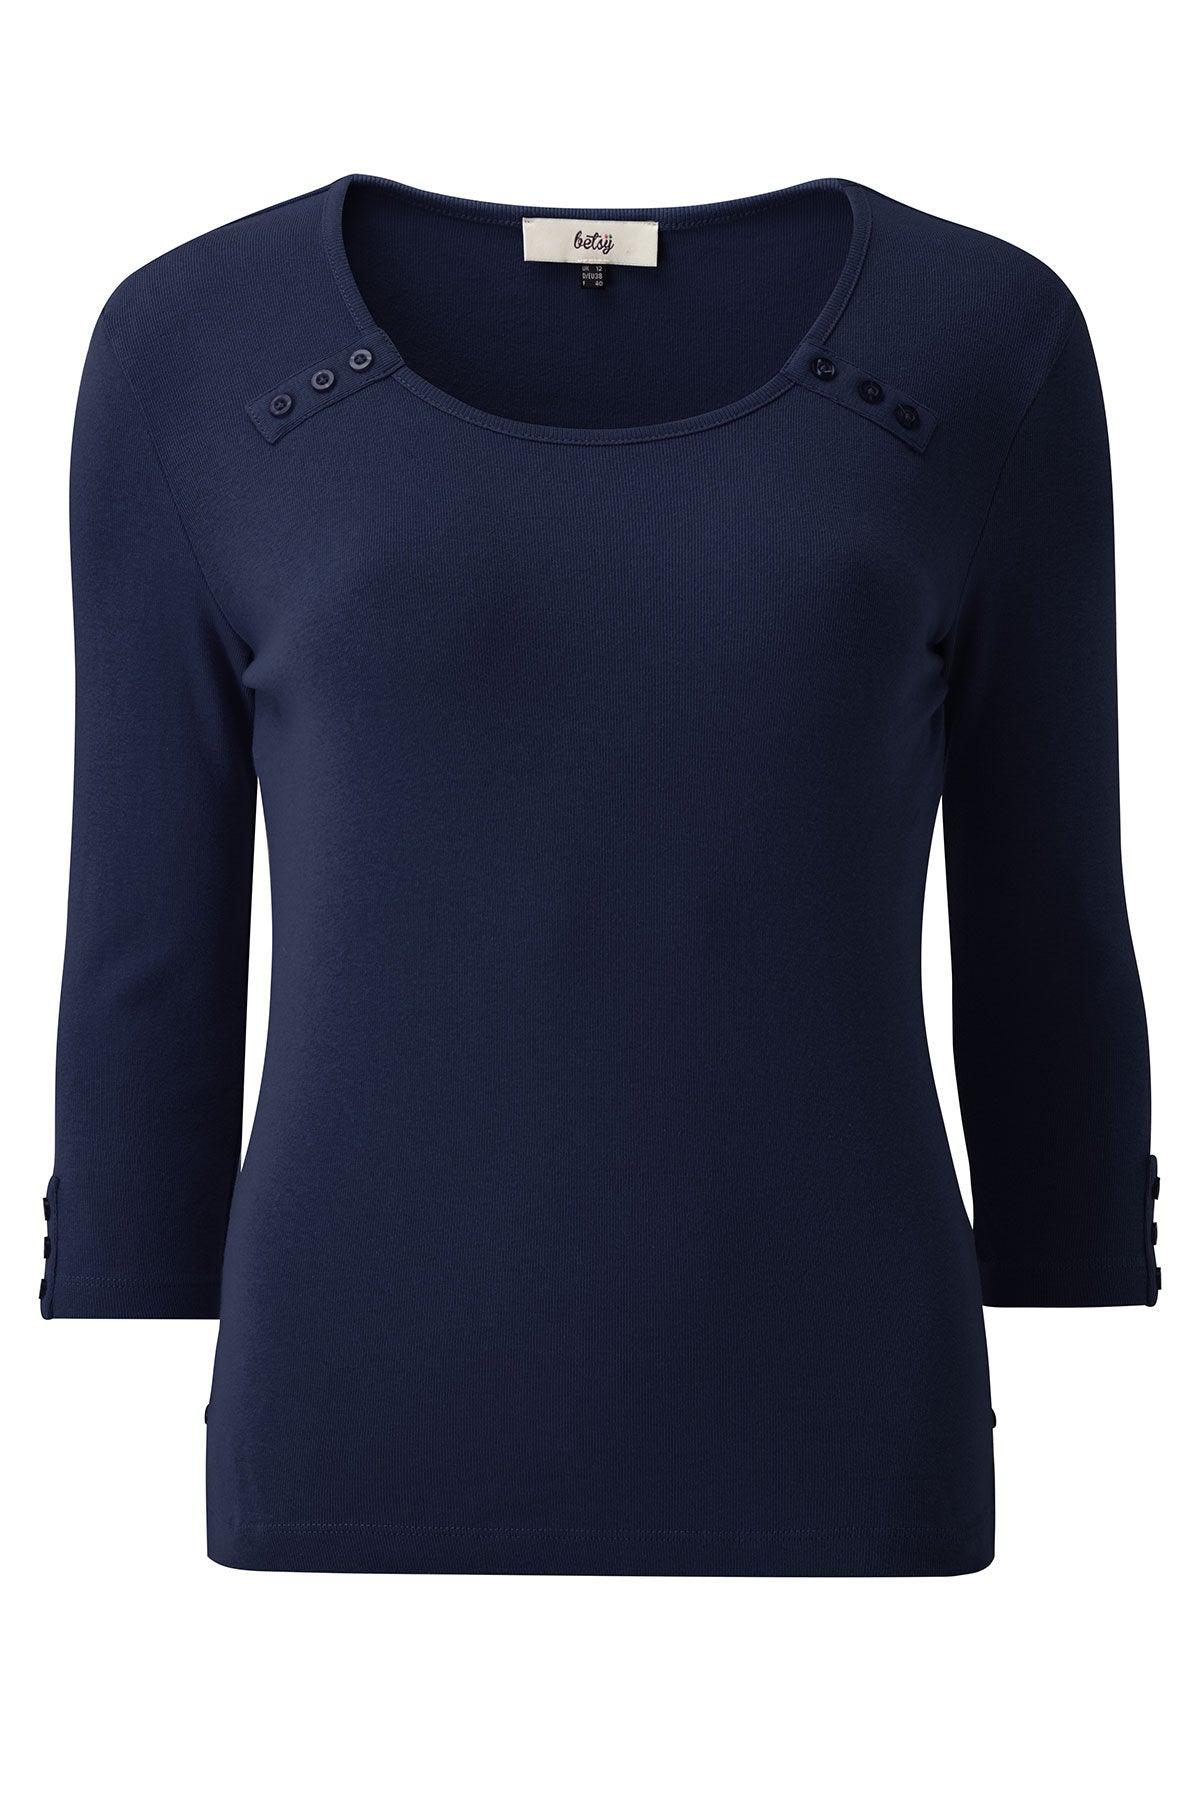 Betsy Essential Button Jersey (Navy)